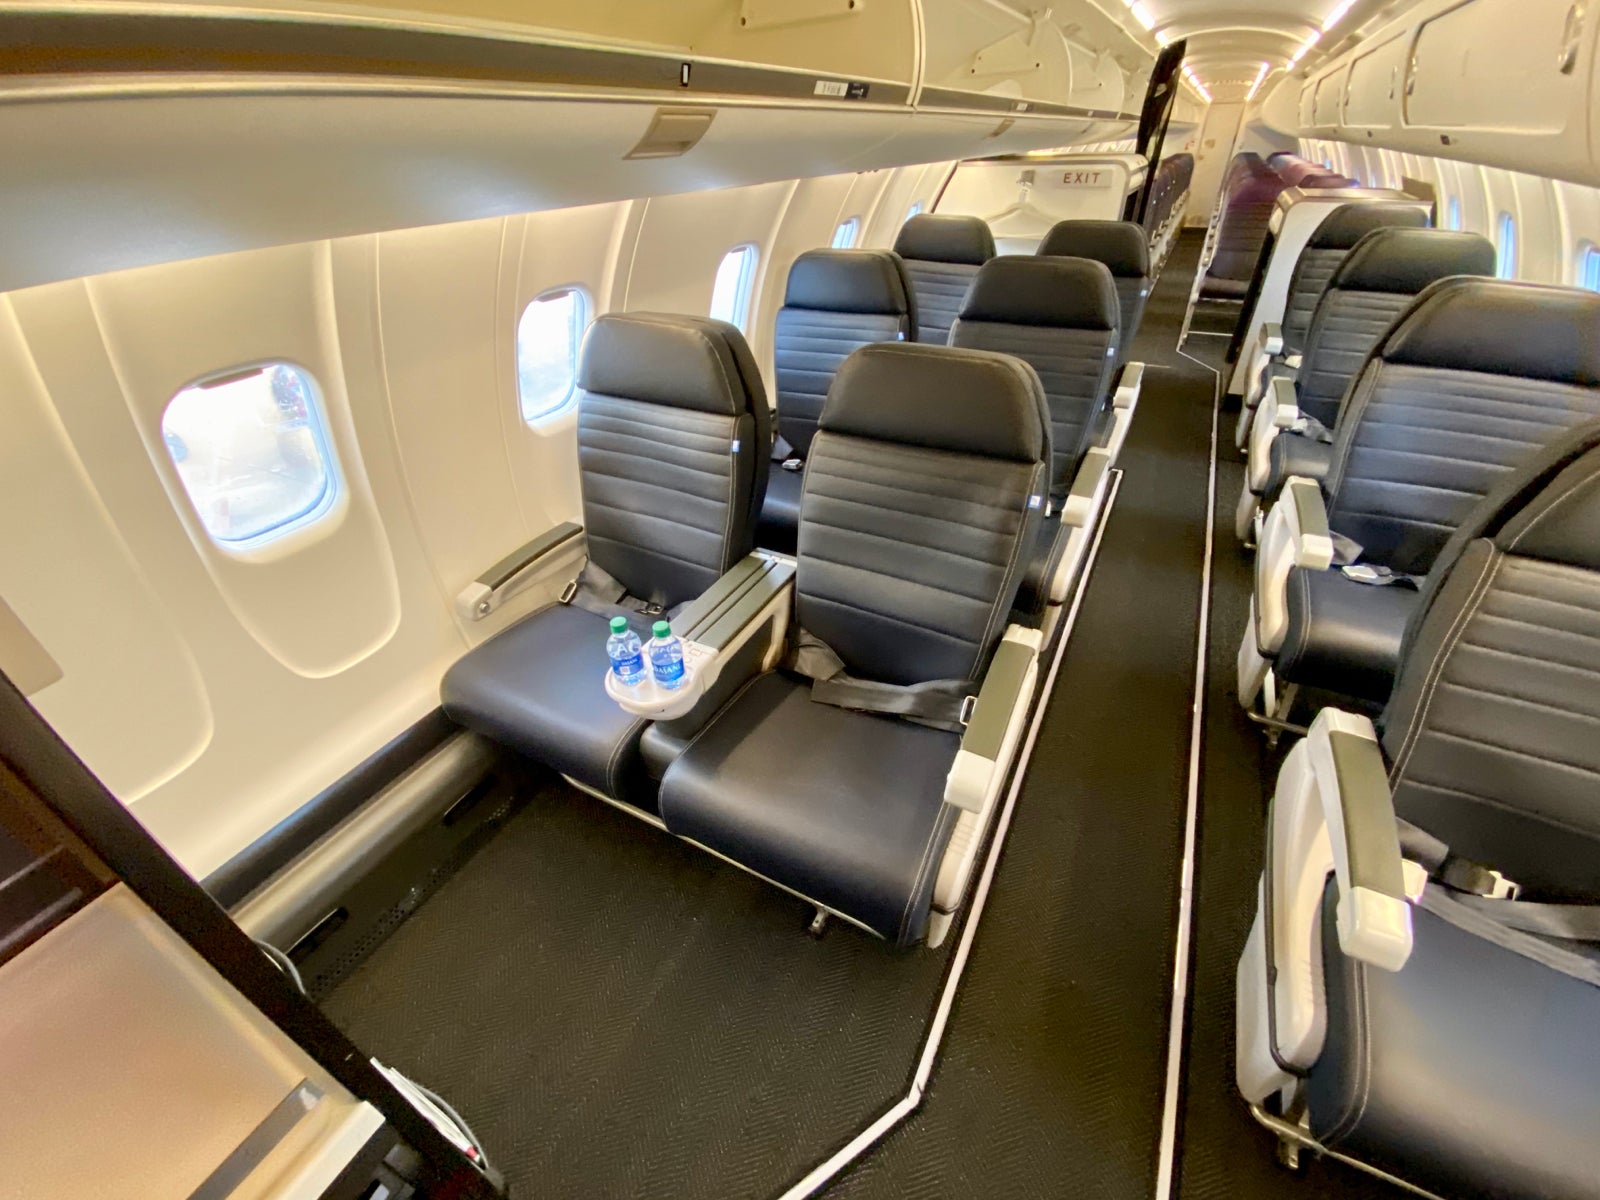 United first class cabin on a CRJ550